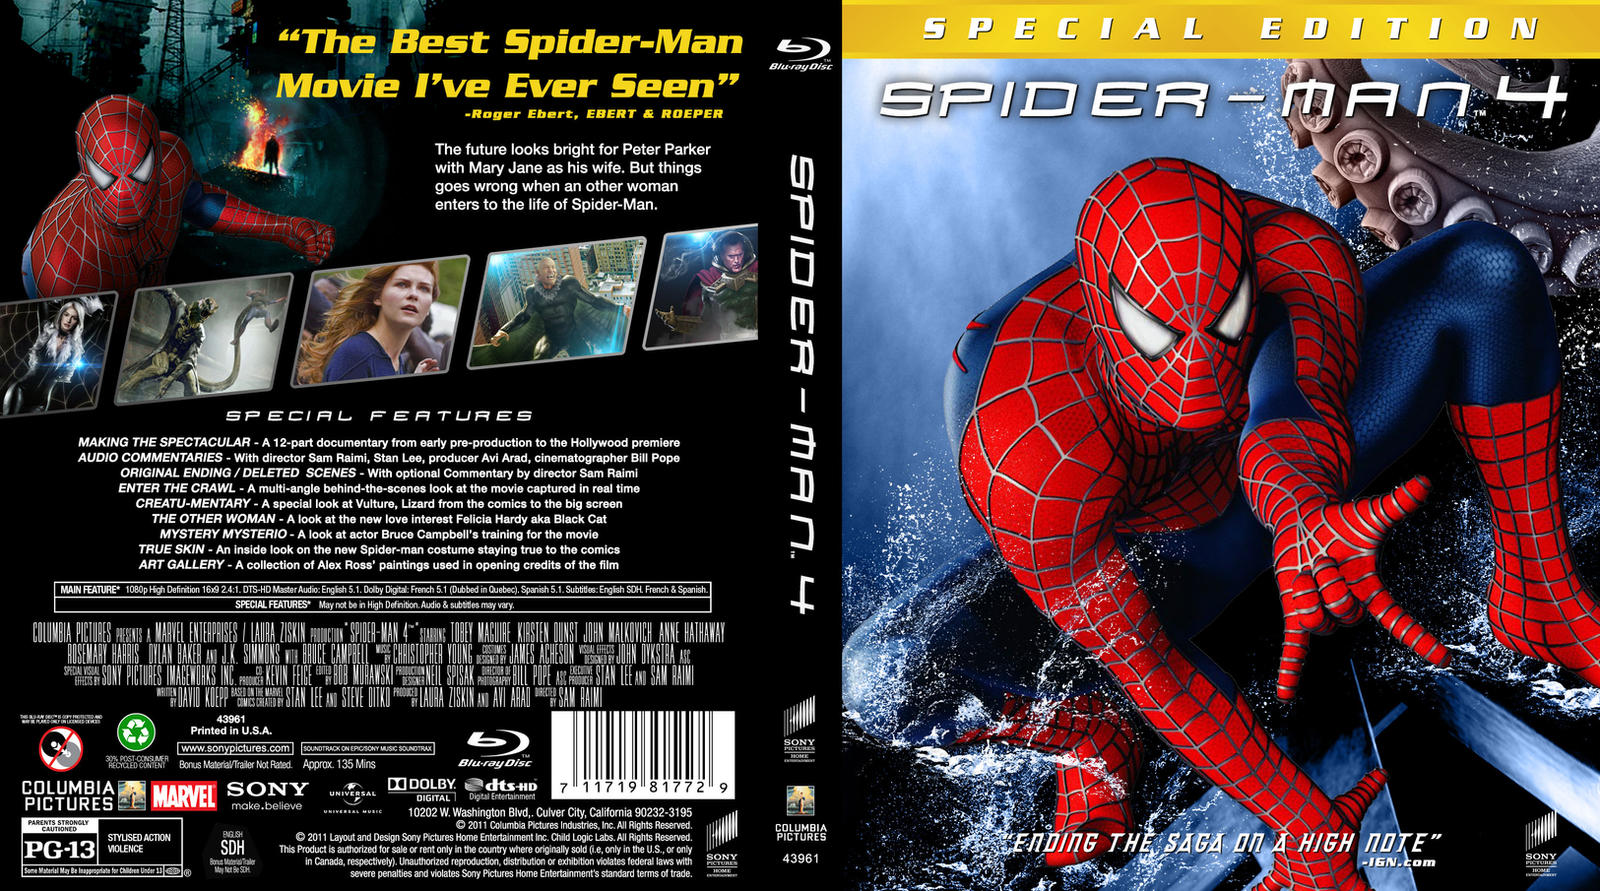 Spider-Man 4 (2011) Blu-ray Cover by childlogiclabs on DeviantArt